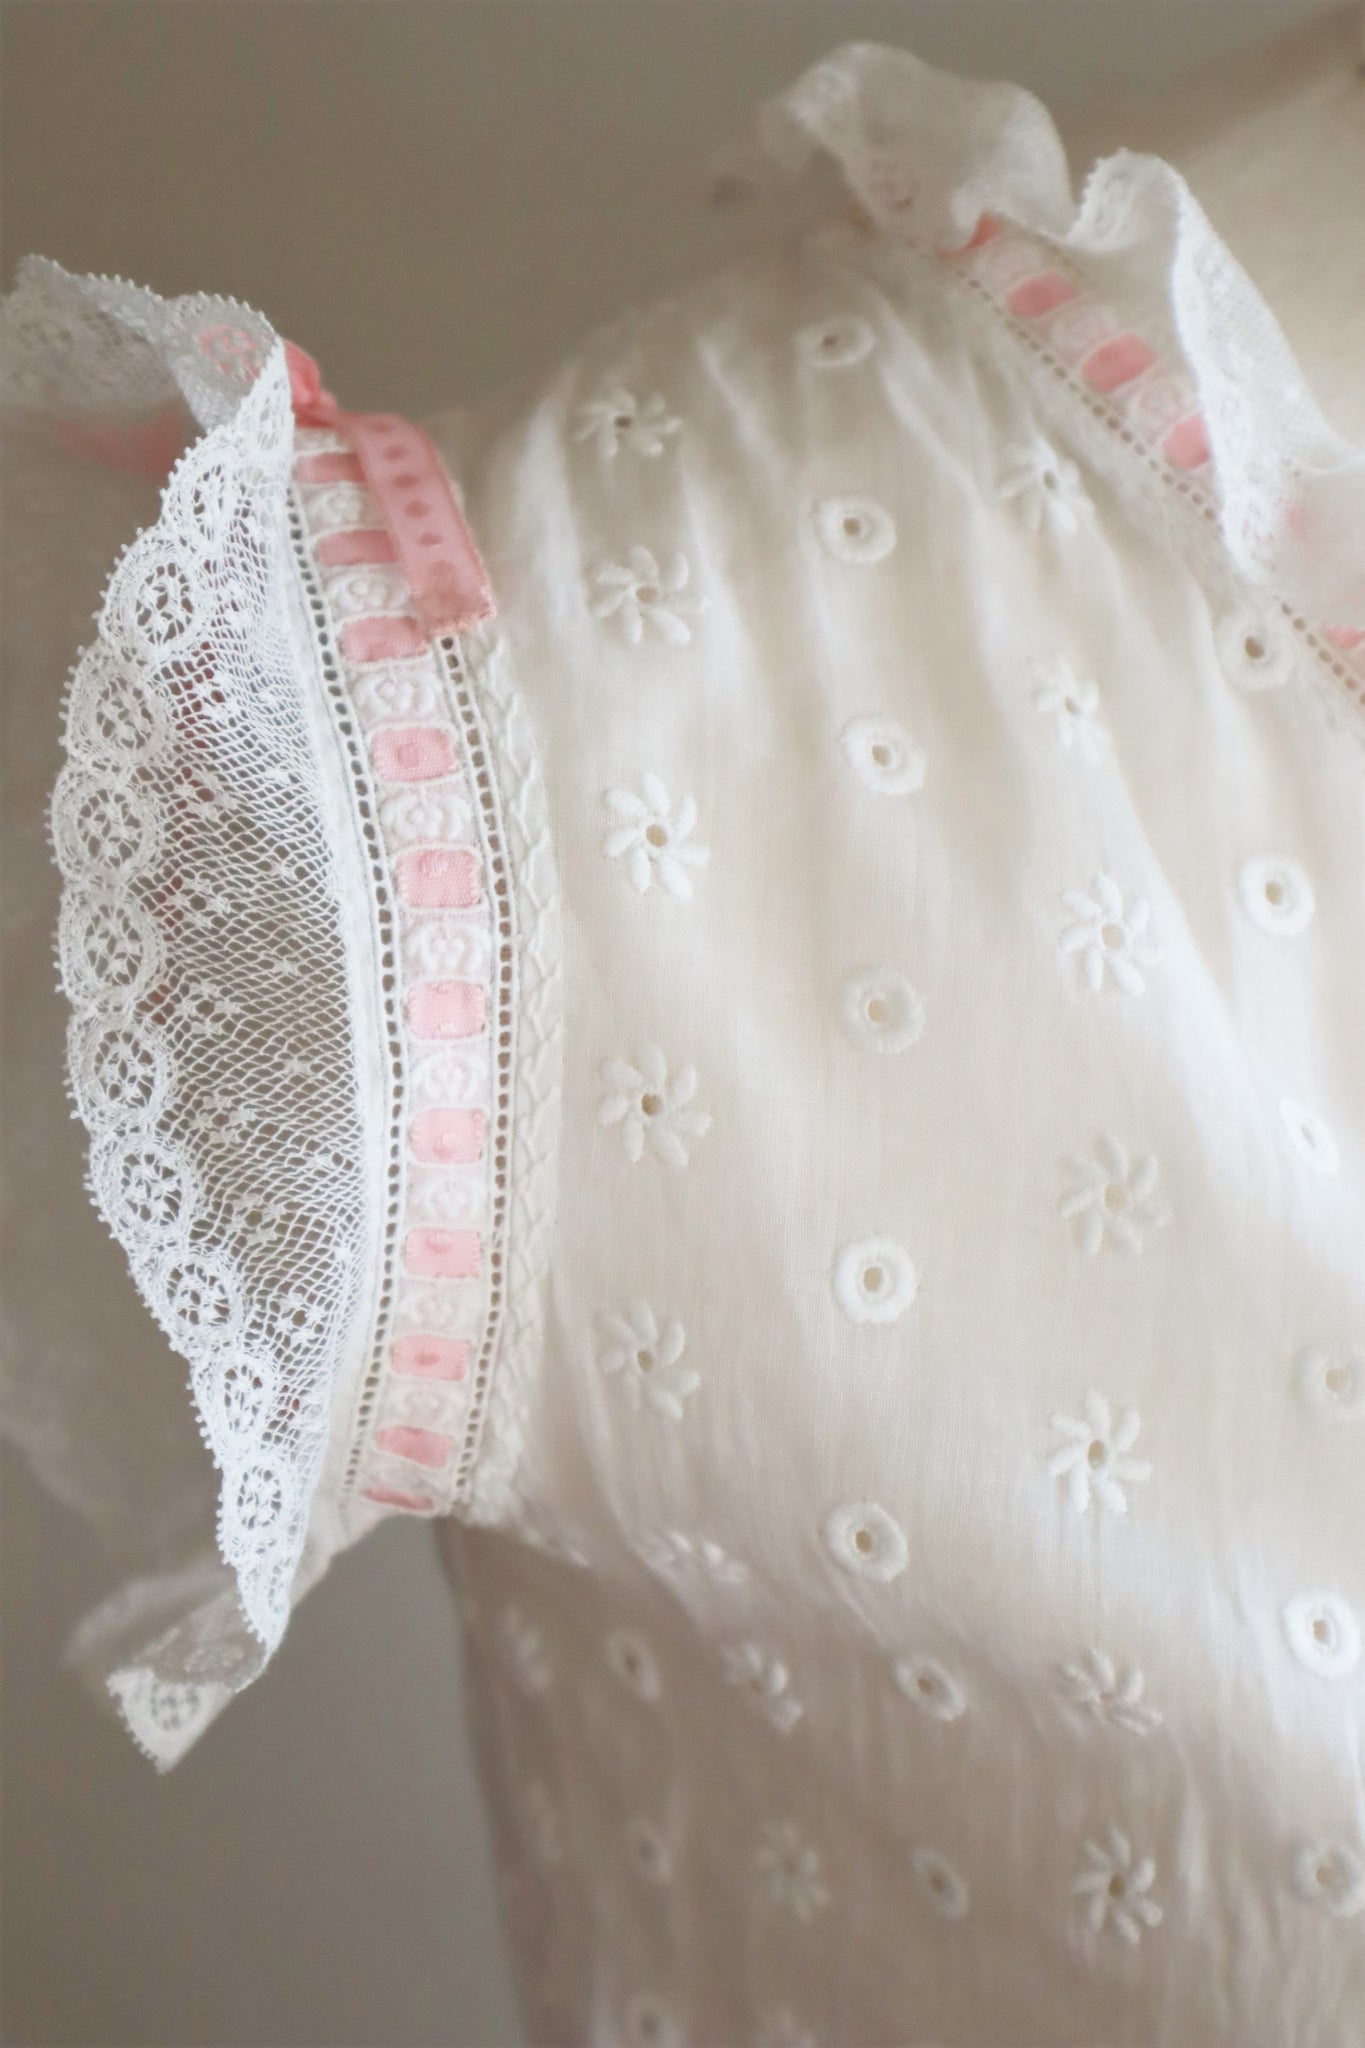 1910s Embroidered Broderie Anglaise With Pink Ribbon Dress